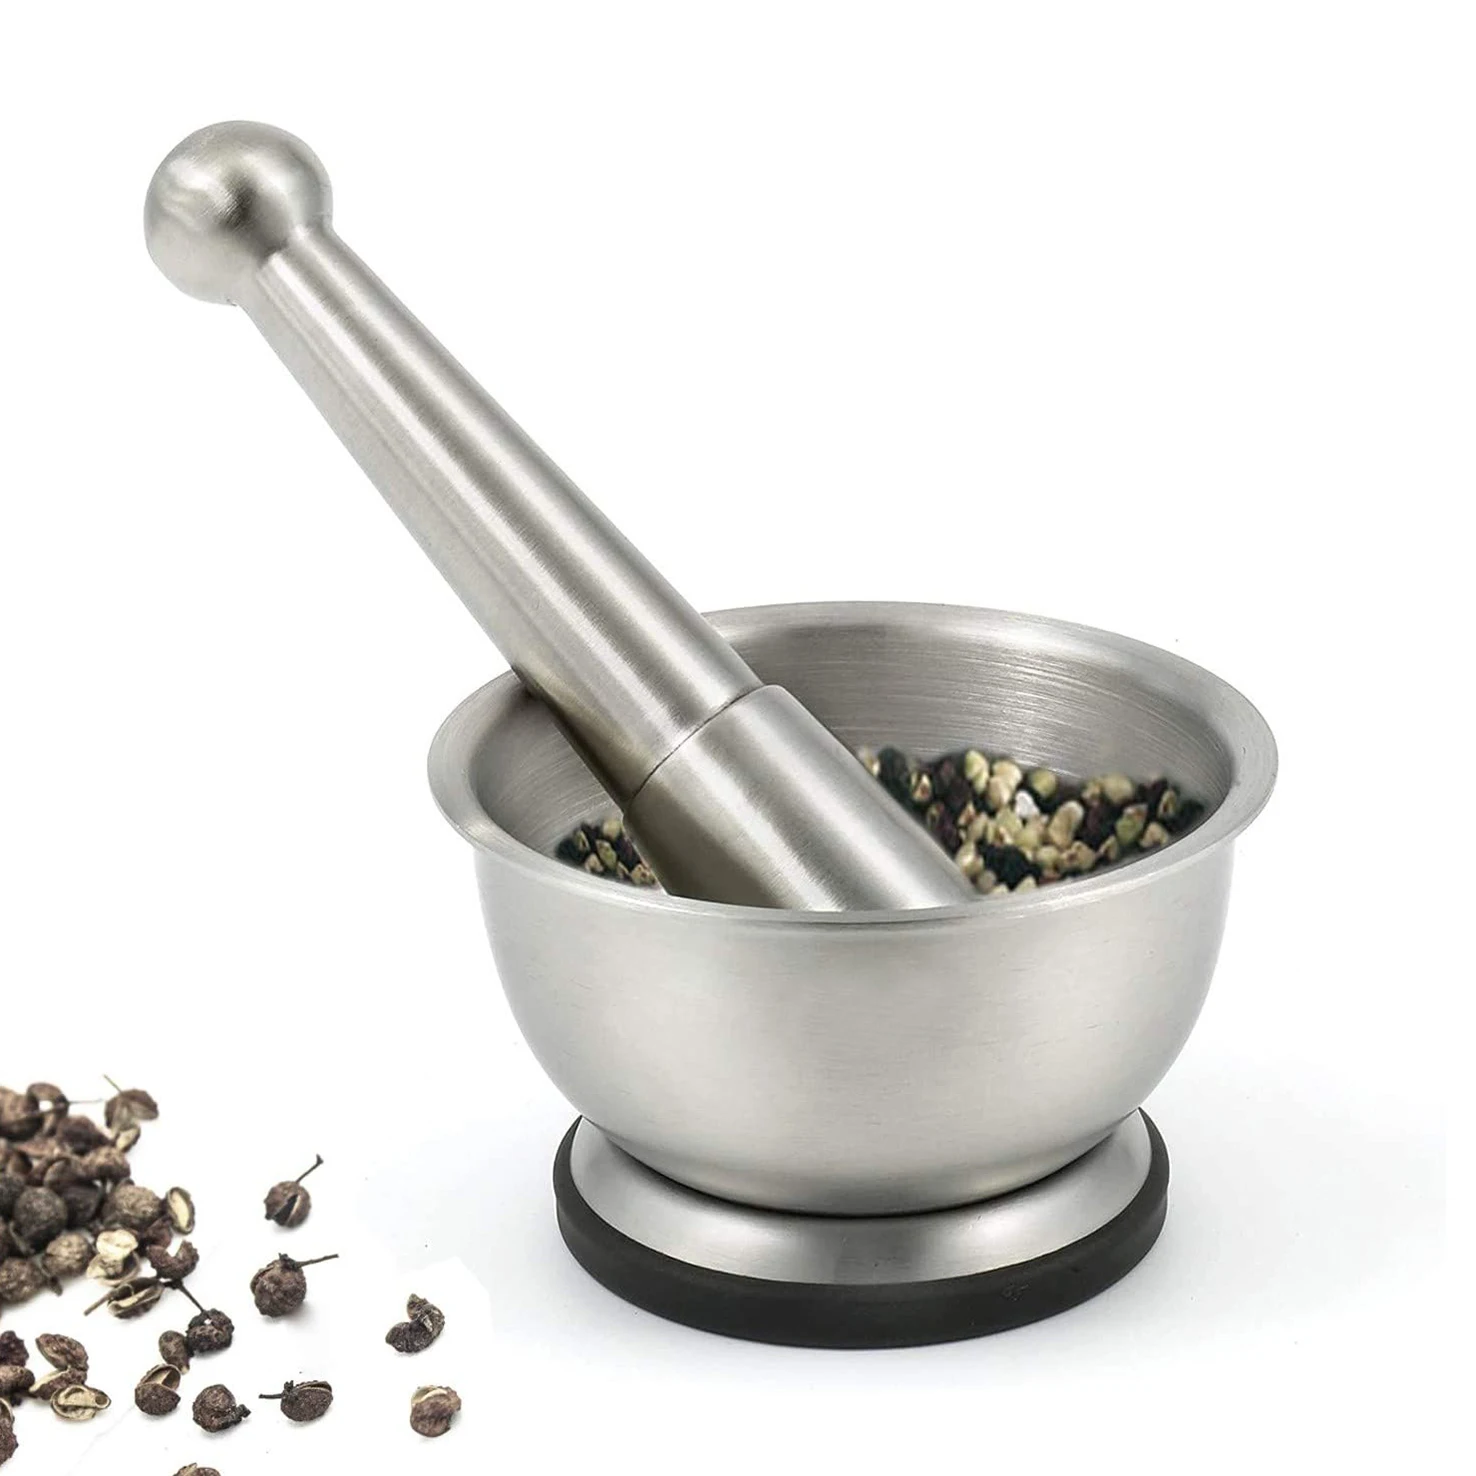 laiwu Stainless Steel Mortar and Pestle with Brush,Pill Crusher,Spice Grinder,Herb Bowl,Pesto Powder